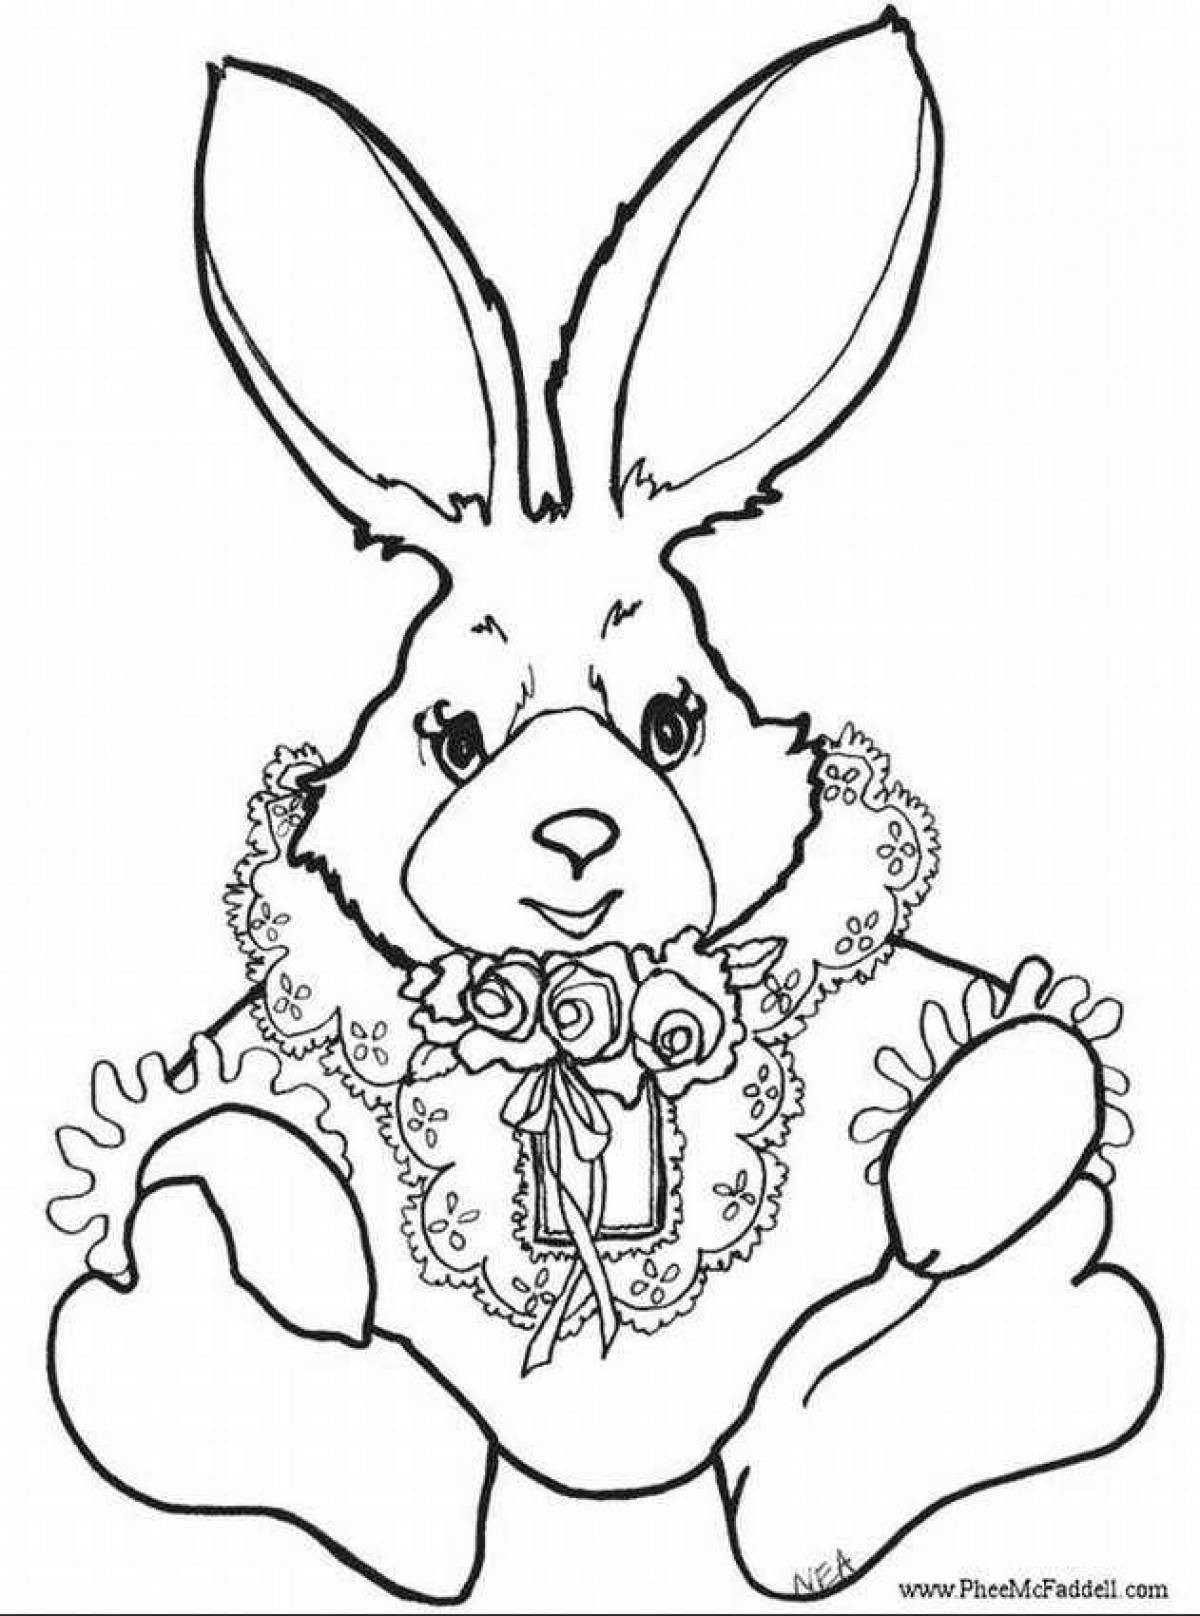 Magic coloring book year of the rabbit 2023